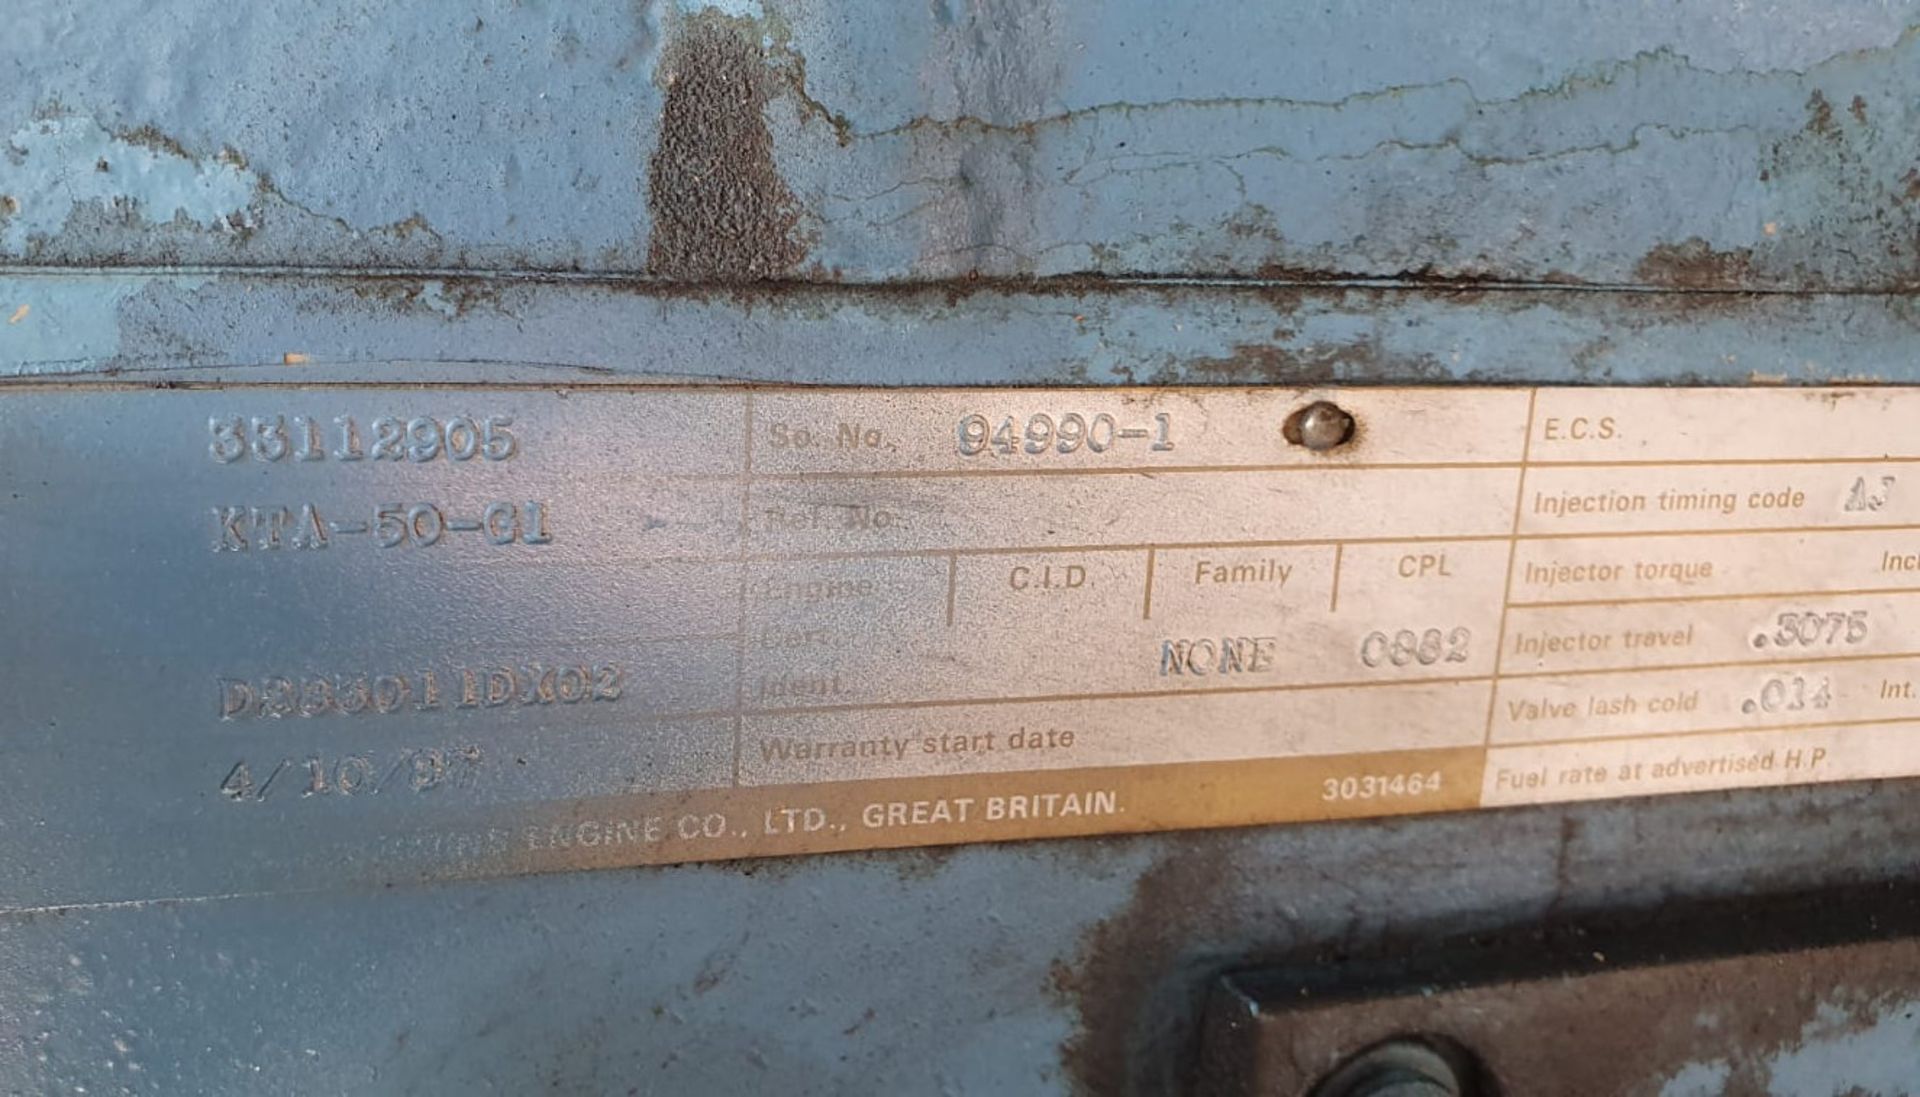 1 x 1987 Hitzinger SGS 9D 040 Generator - Only 800 Hours Use - Ref: T4UB/HZ - CL333 - Location: - Image 16 of 20